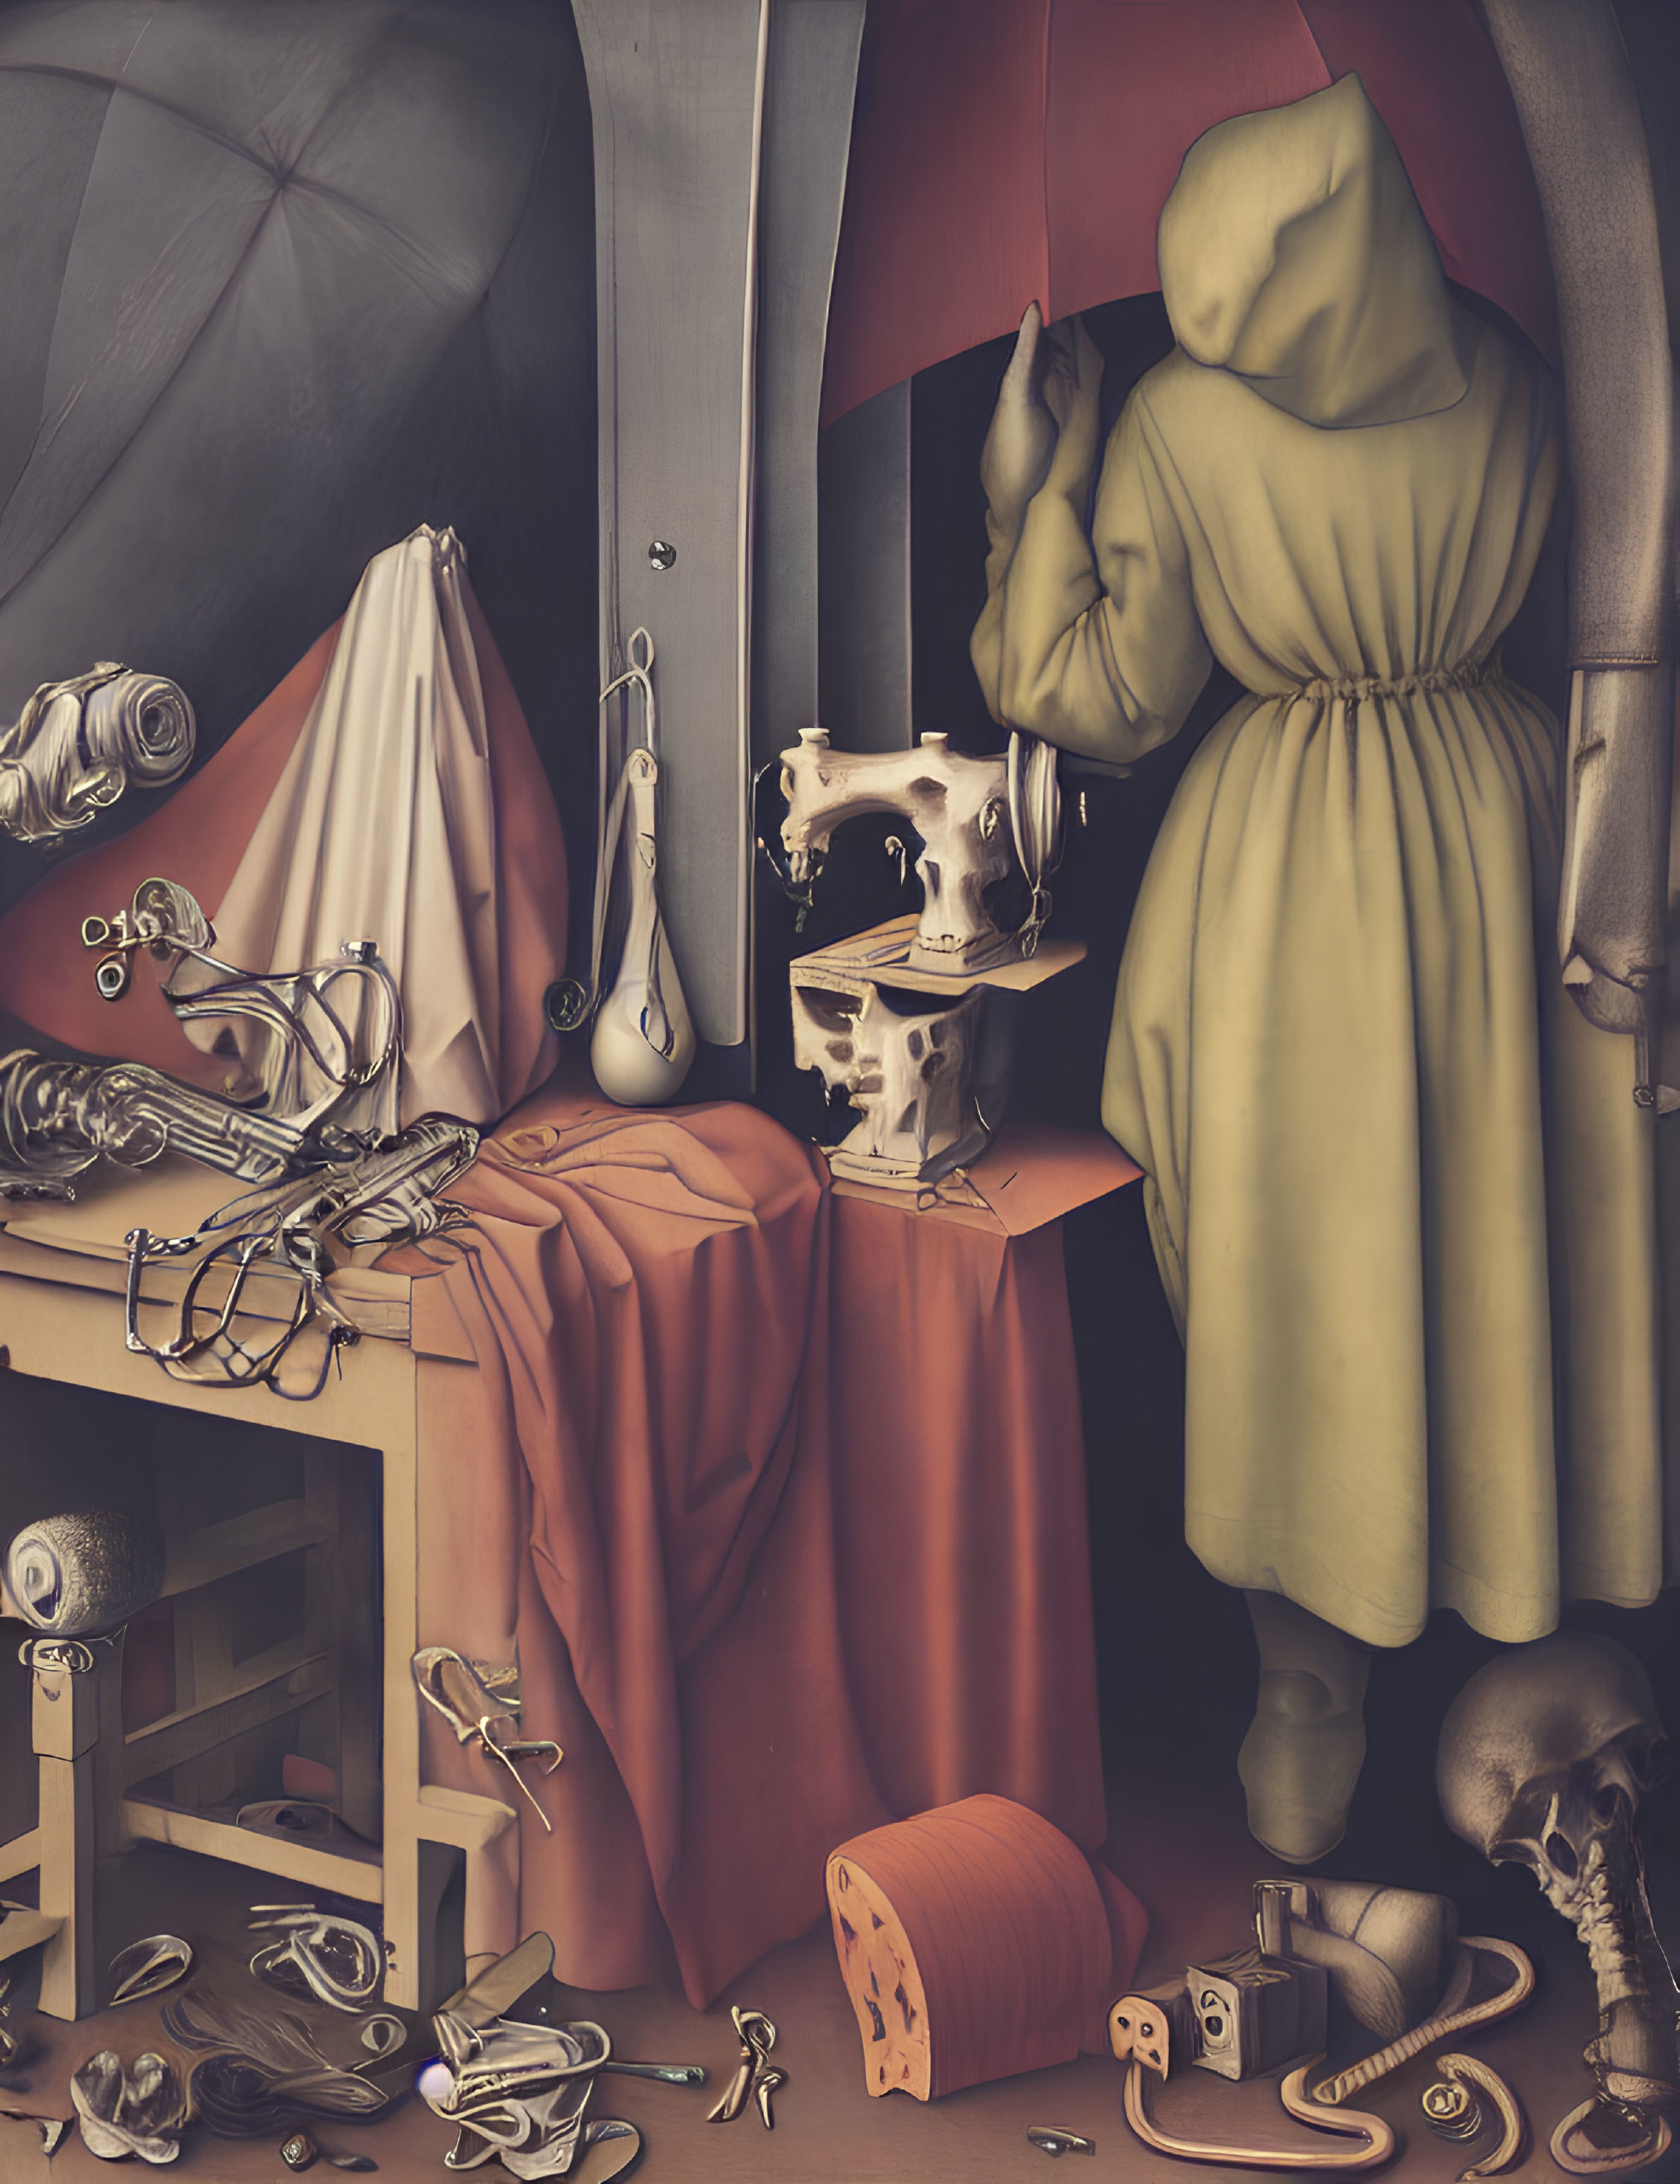 Surreal Cloaked Figure Artwork with Skull and Drapery in Earthy Tones